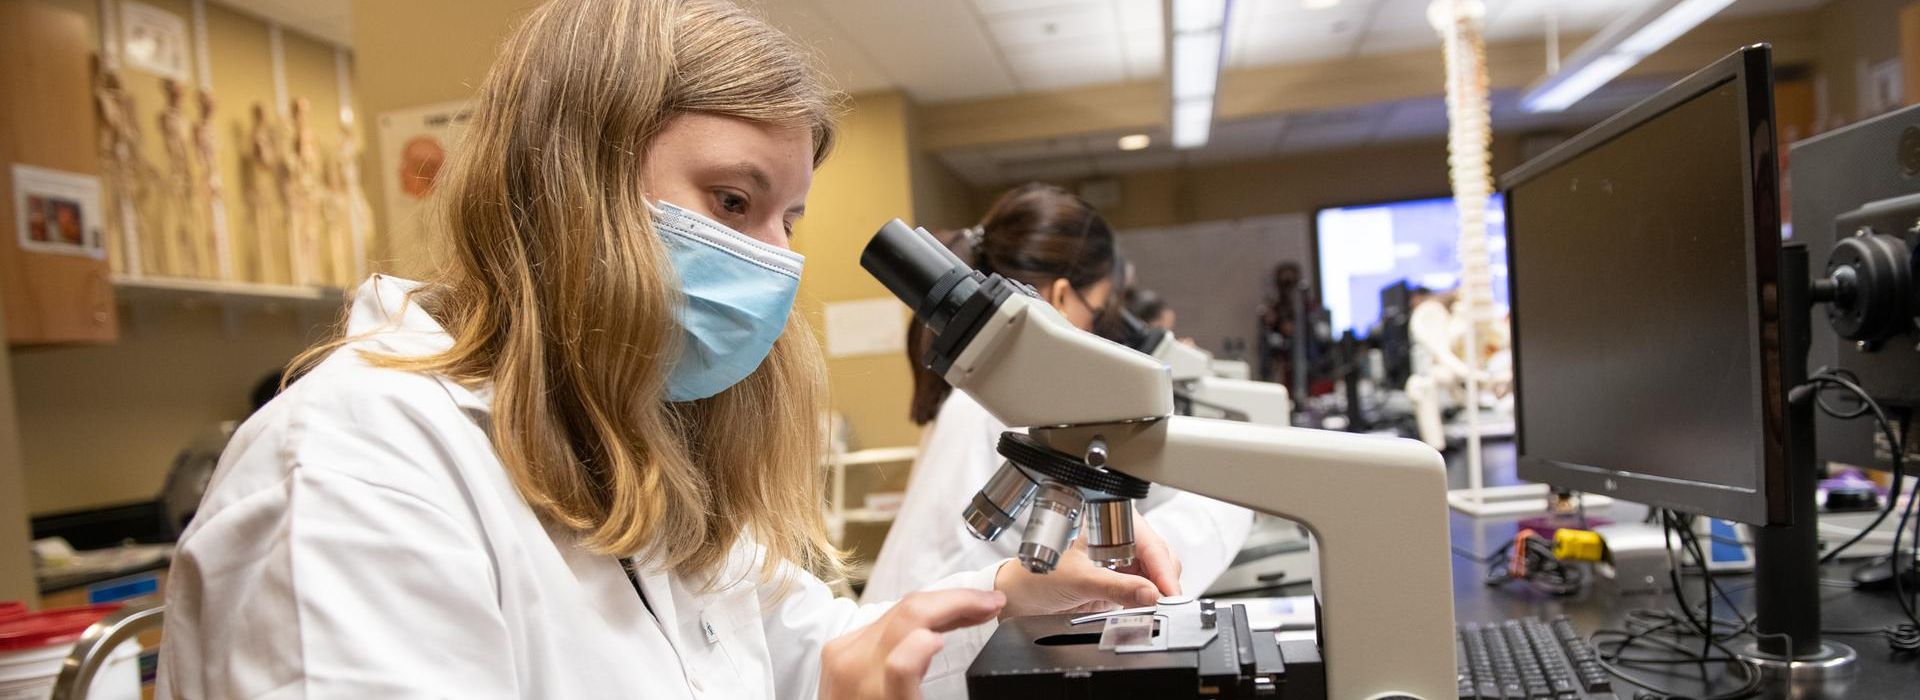 Female student looking through microscope in a lab. 